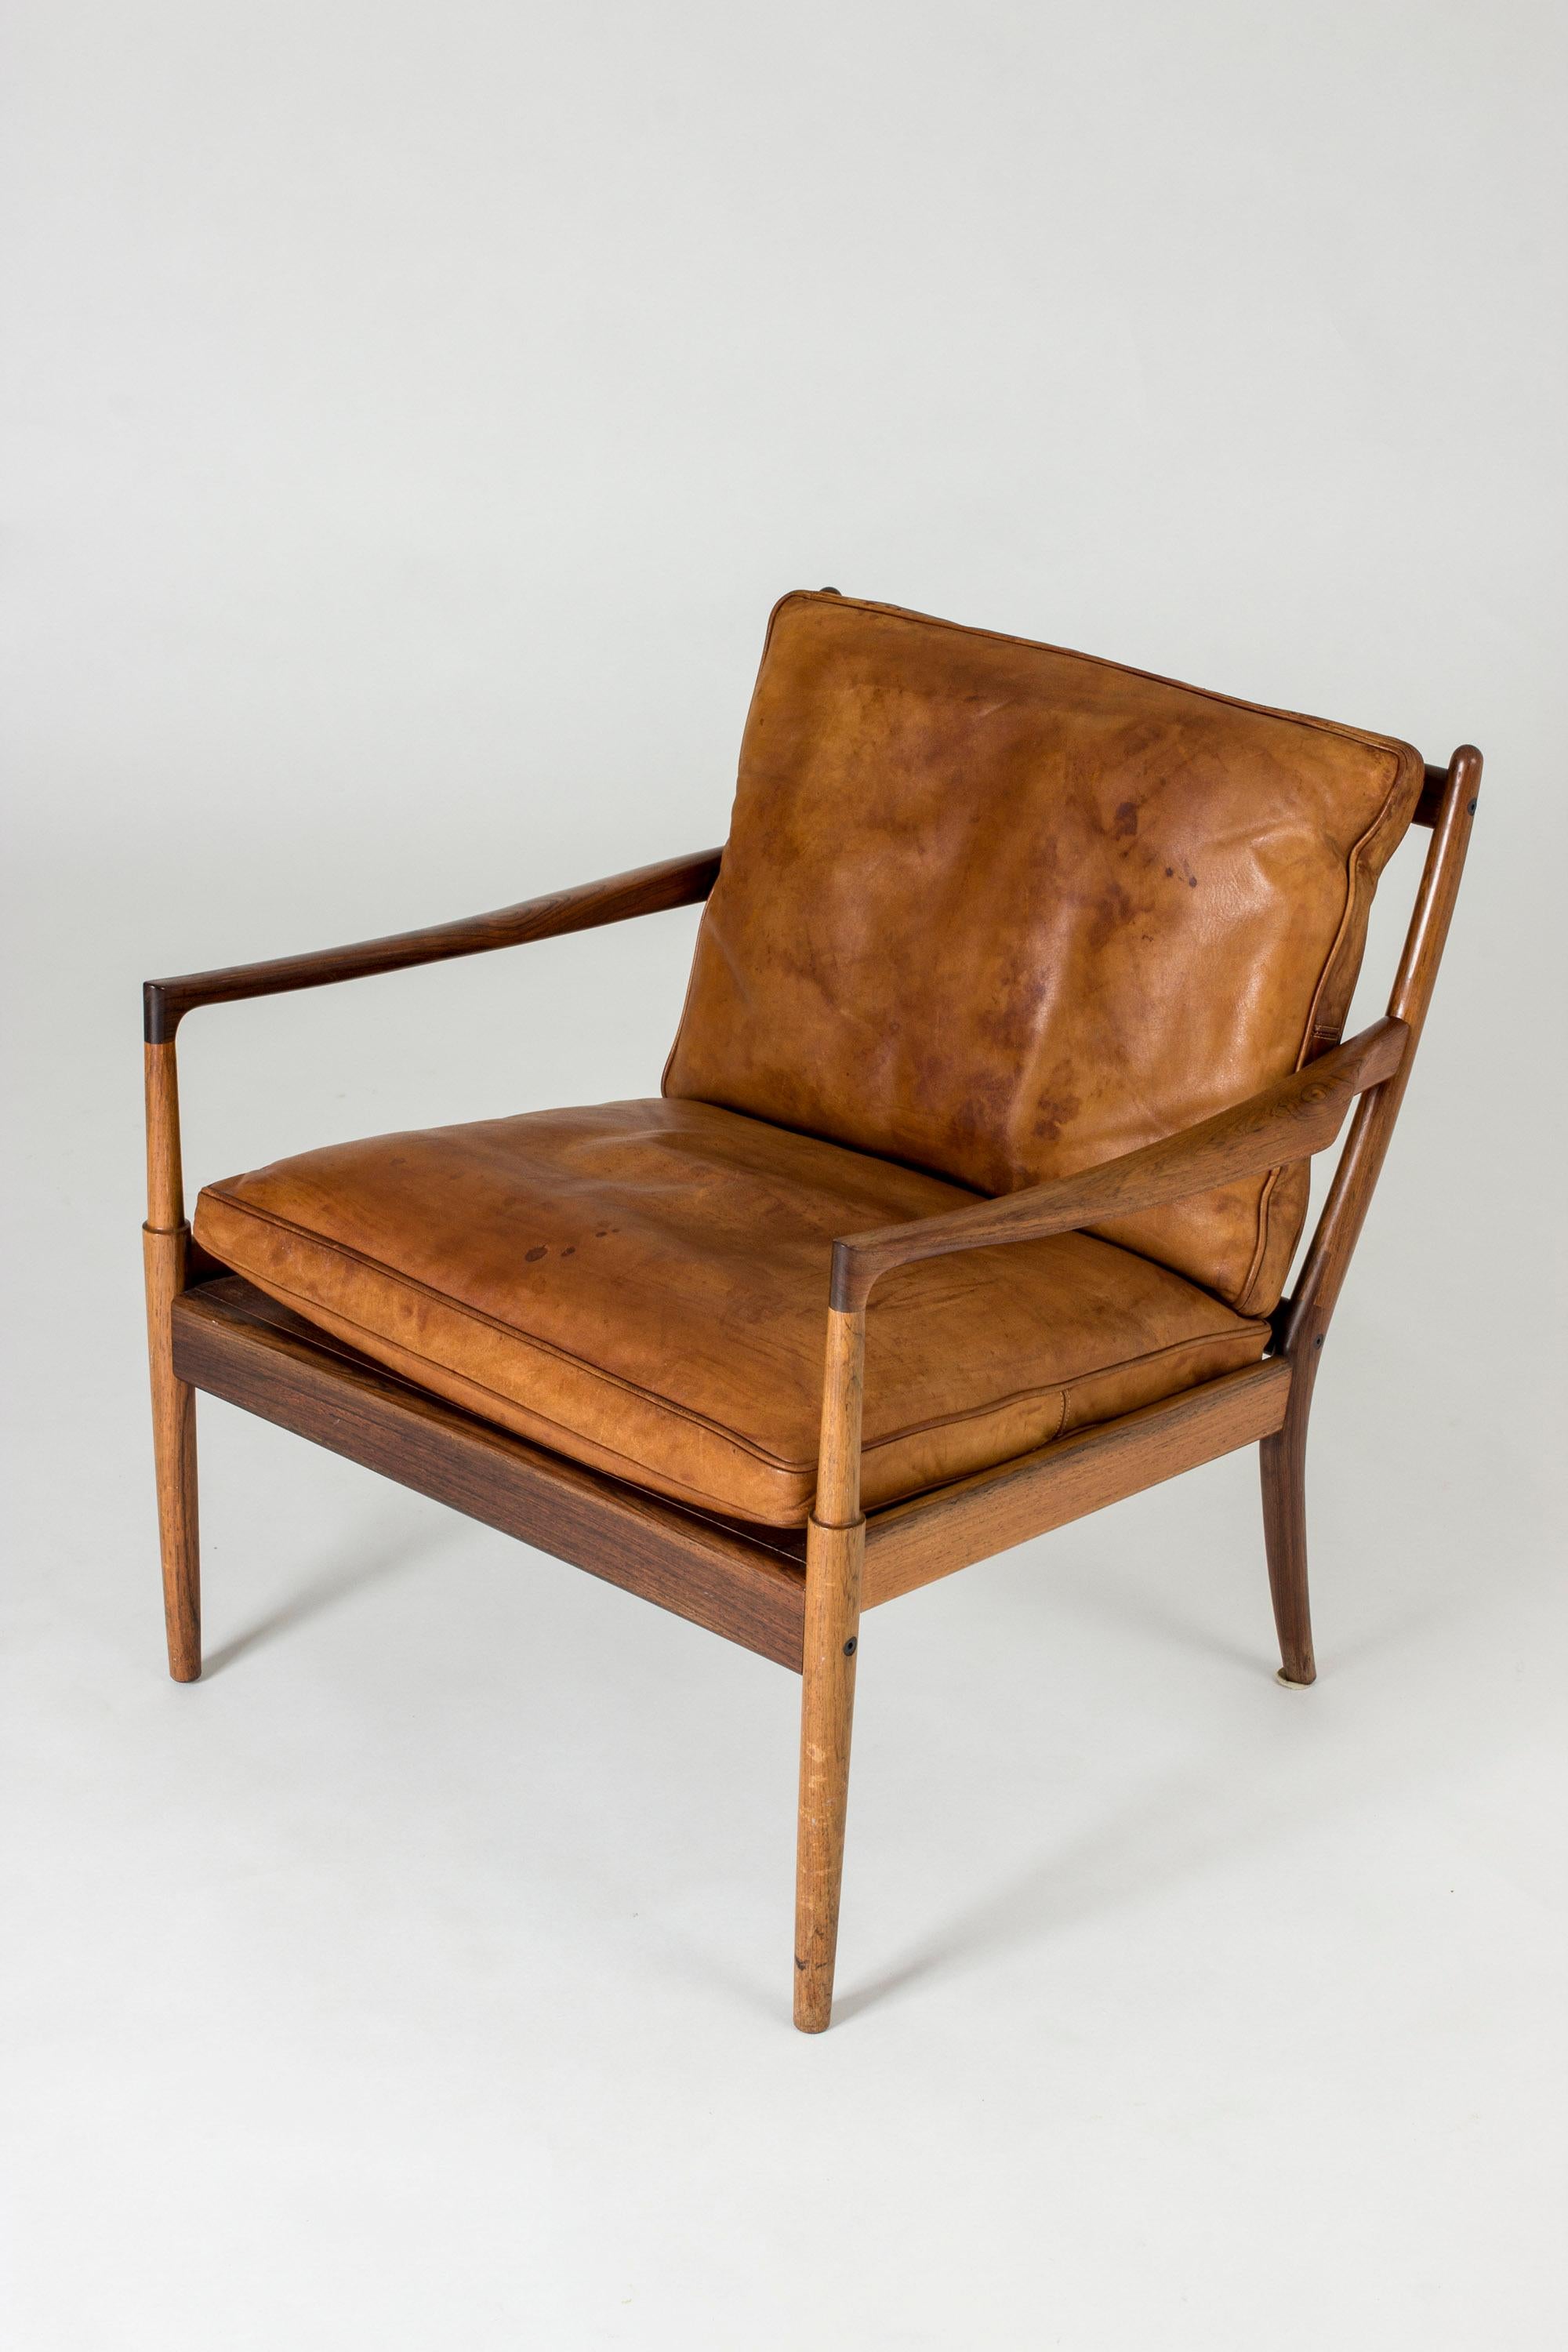 Pair of Rosewood and Leather “Samsö” Lounge Chairs by Ib Kofod Larsen 8